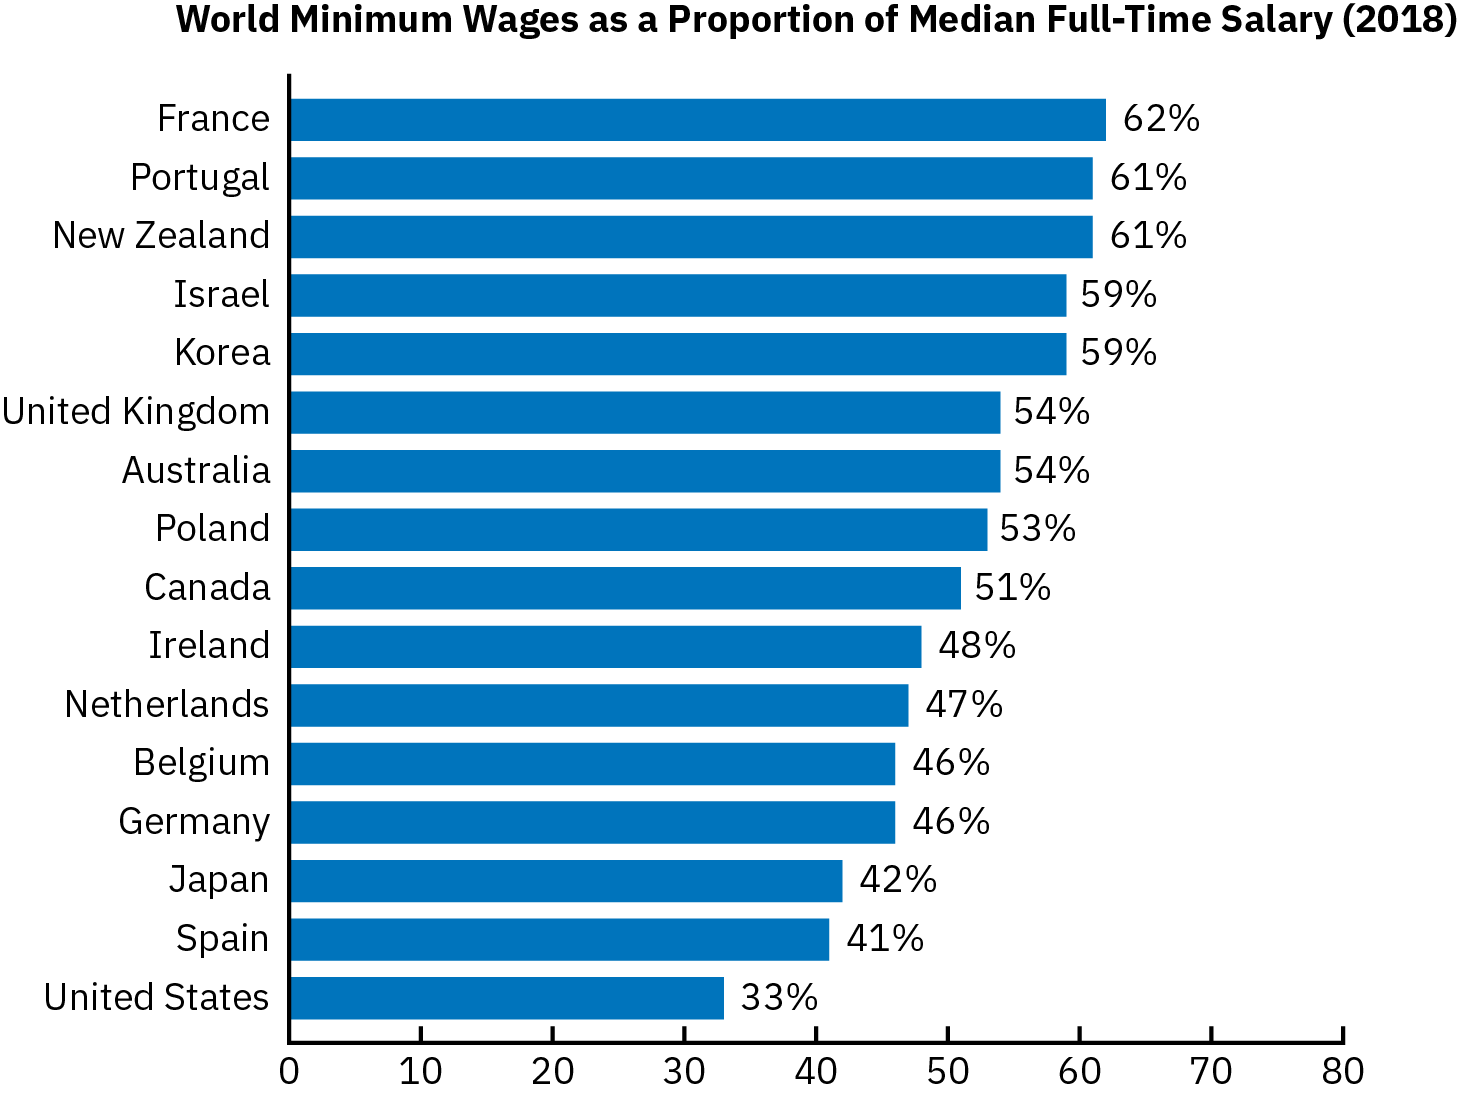 A horizontal bar graph shows World Minimum Wages as a Proportion of Median Full Time Salary in 2018. France, Portugal, New Zealand, Israel, Korea, the United Kingdom, Australia, Poland, and Canada all have minimum wages that are more than 50% of the median full time salary. Ireland, the Netherlands, Belgium, Germany, Japan, and Spain’s minimum wage is more than 40% of the median full time salary. The United States is at the bottom of this chart, with a minimum wage that is 33% of the median full time salary.